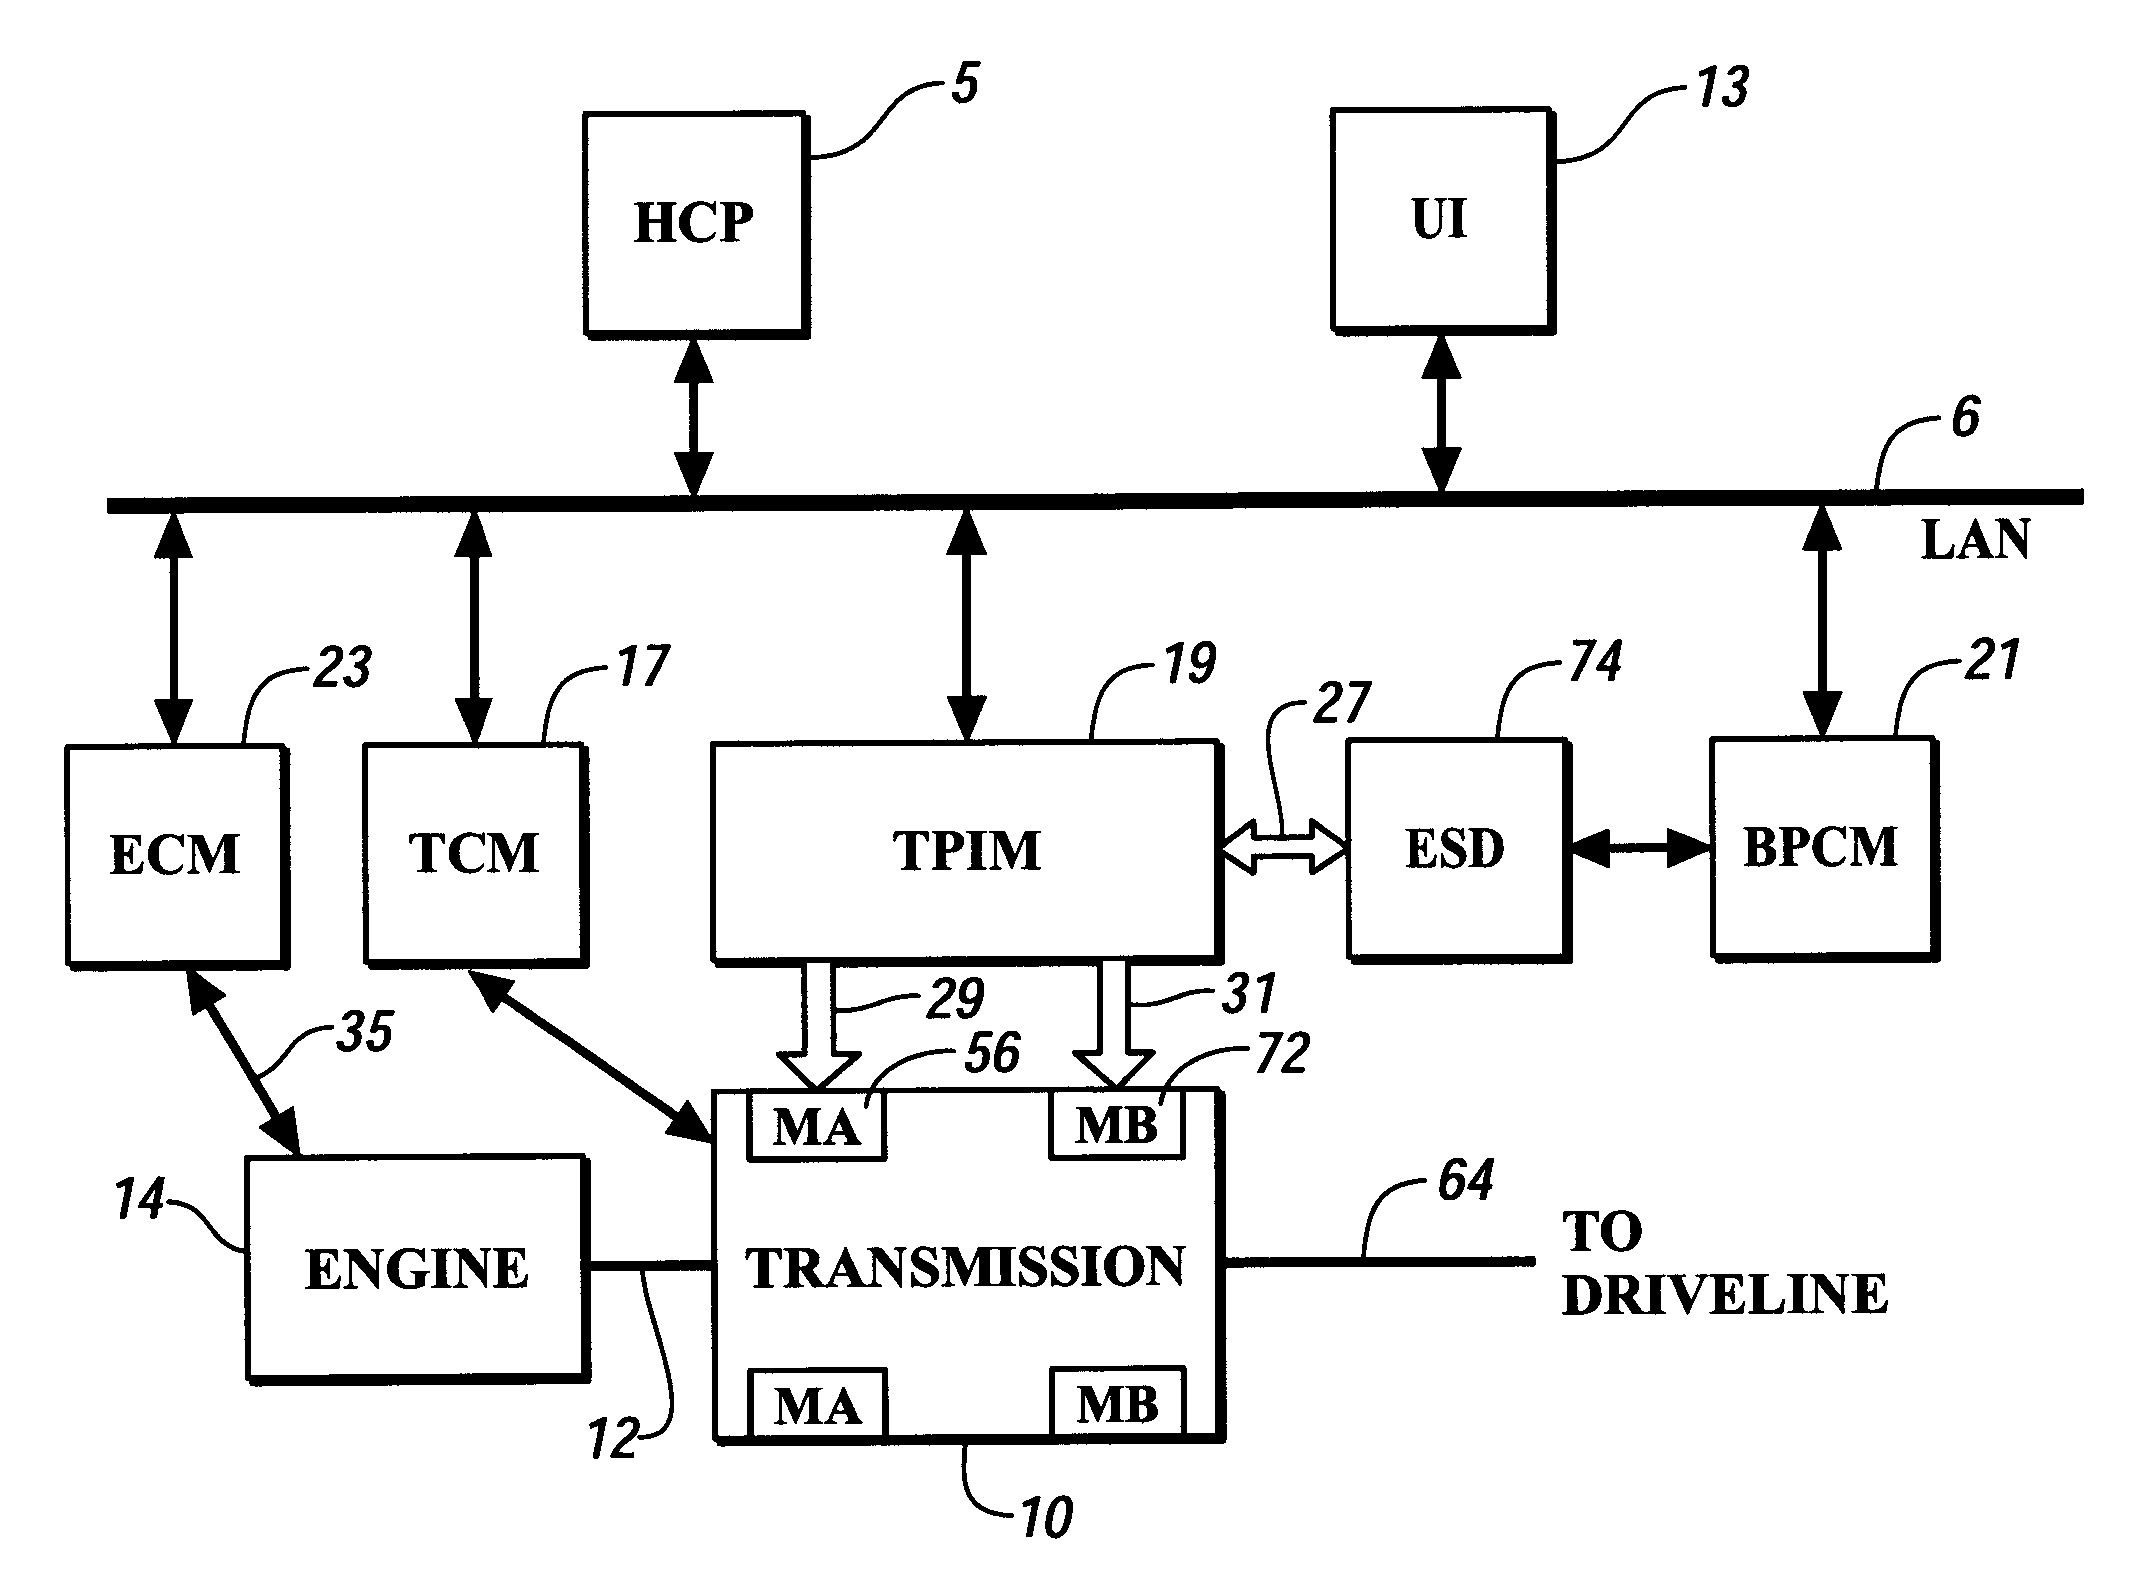 Method for operating a hybrid electric powertrain based on predictive effects upon an electrical energy storage device